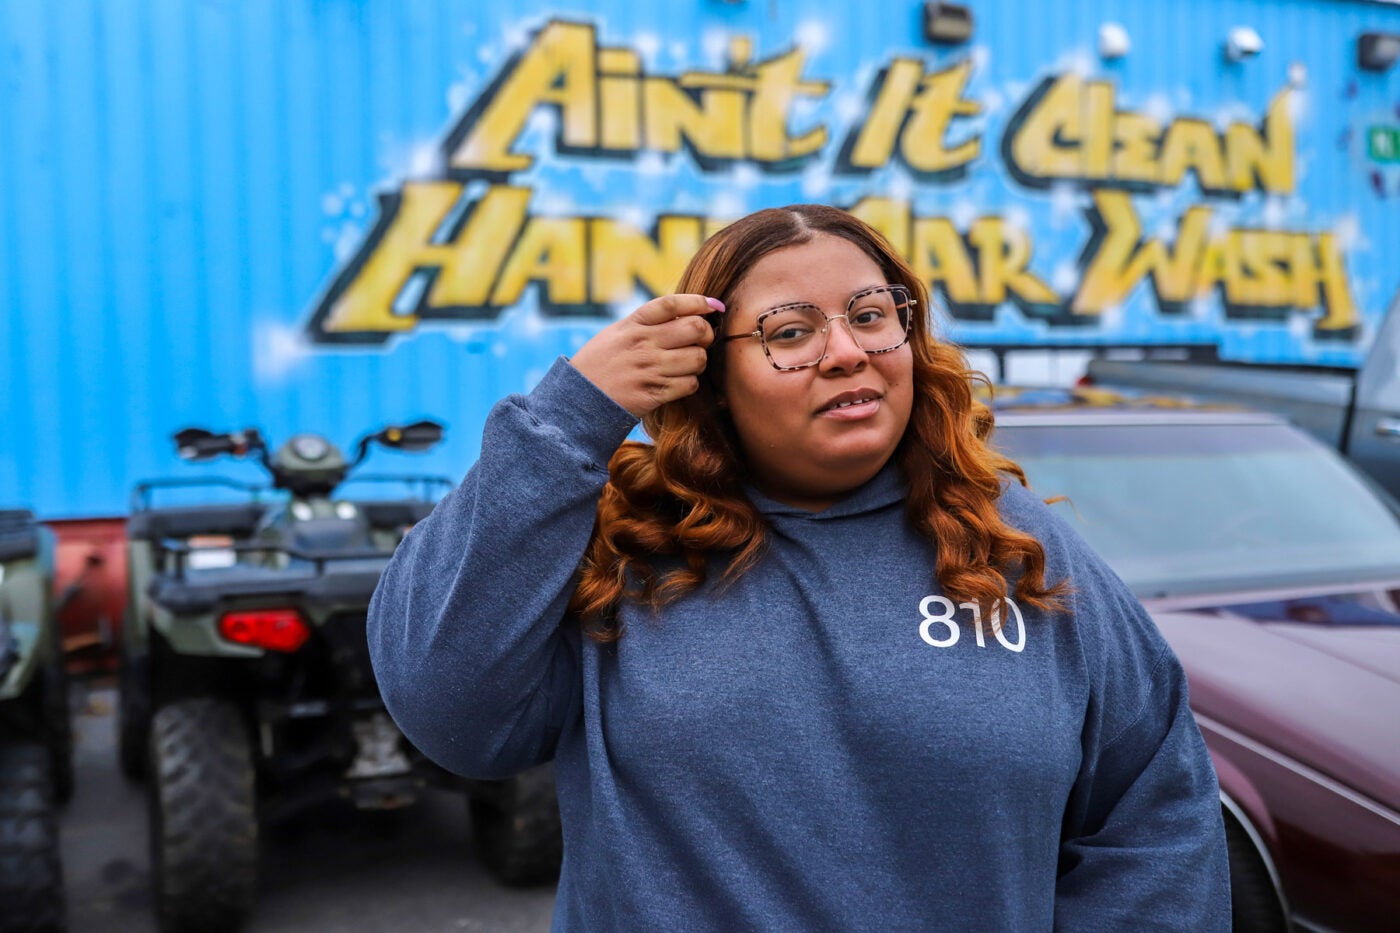 Dionna Brown stands outside a car wash, staring at the camera while placing some hair behind her ear. The words "Ain't it clean hand car wash" in yellow block type on a bright blue wall are behind her.